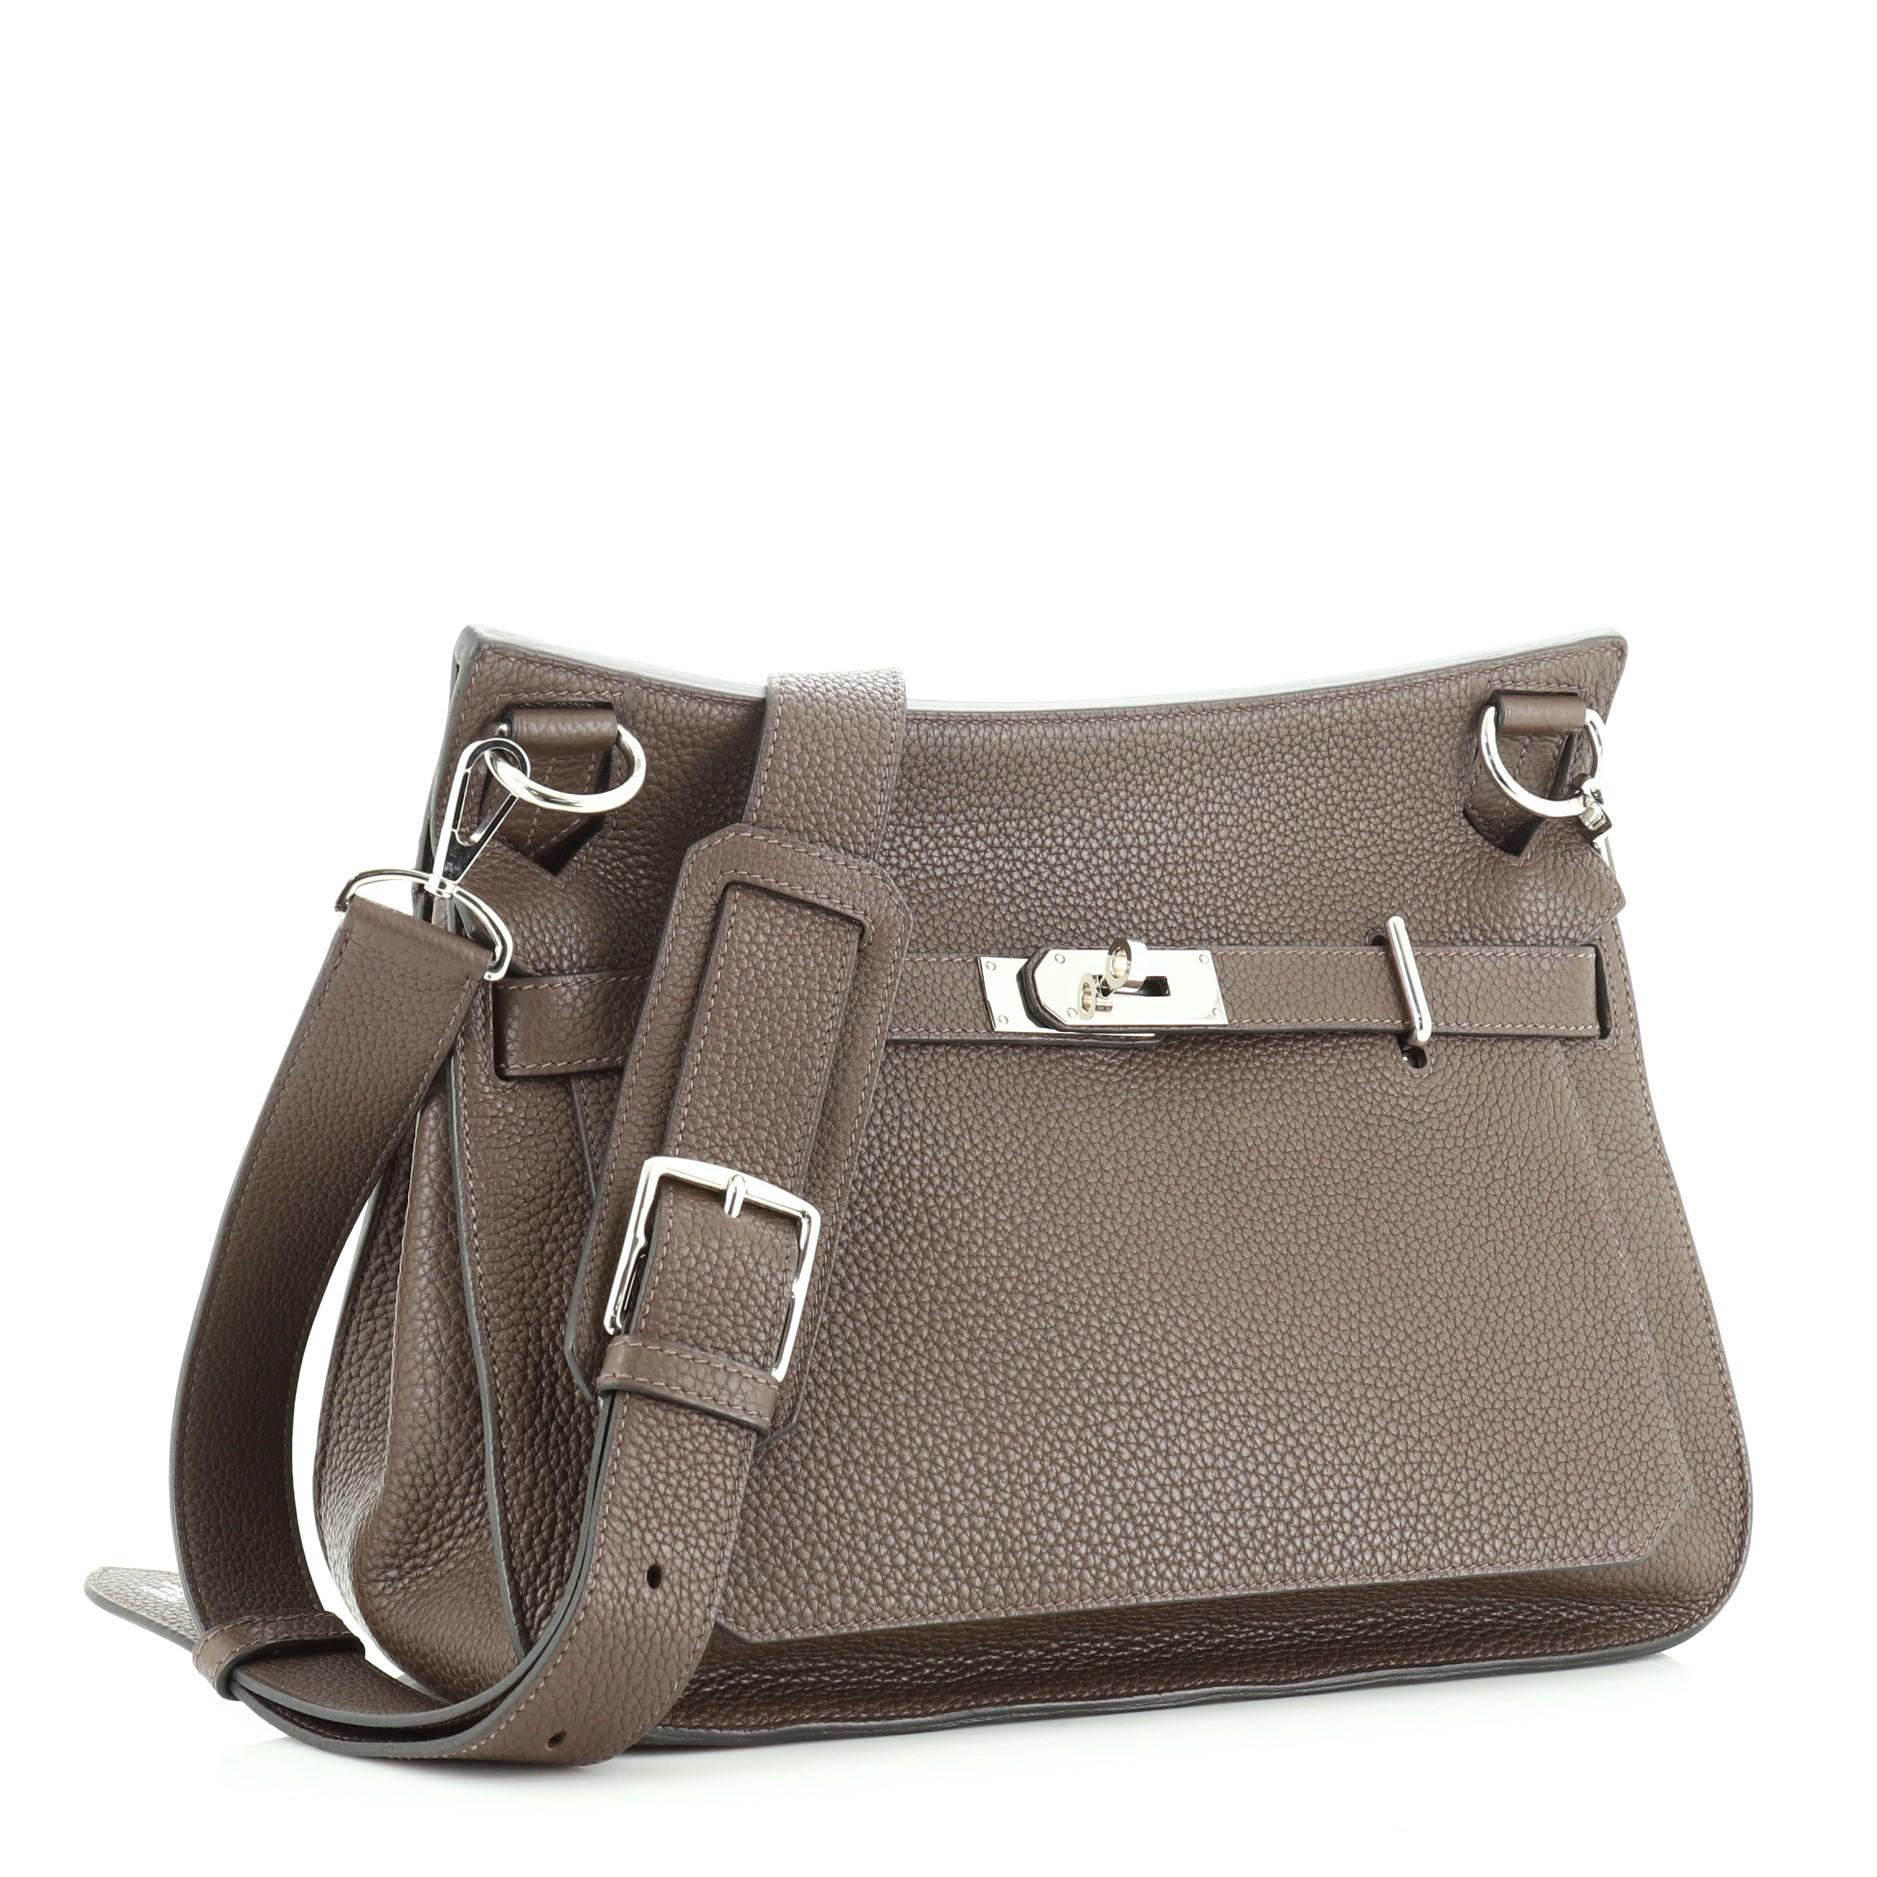 This Hermes Jypsiere Handbag Clemence 31, crafted from Chocolate brown Clemence leather, features a flat adjustable leather shoulder strap and palladium hardware. Its front flap with turn-lock clasp closure opens to a Chocolate brown Chevre leather